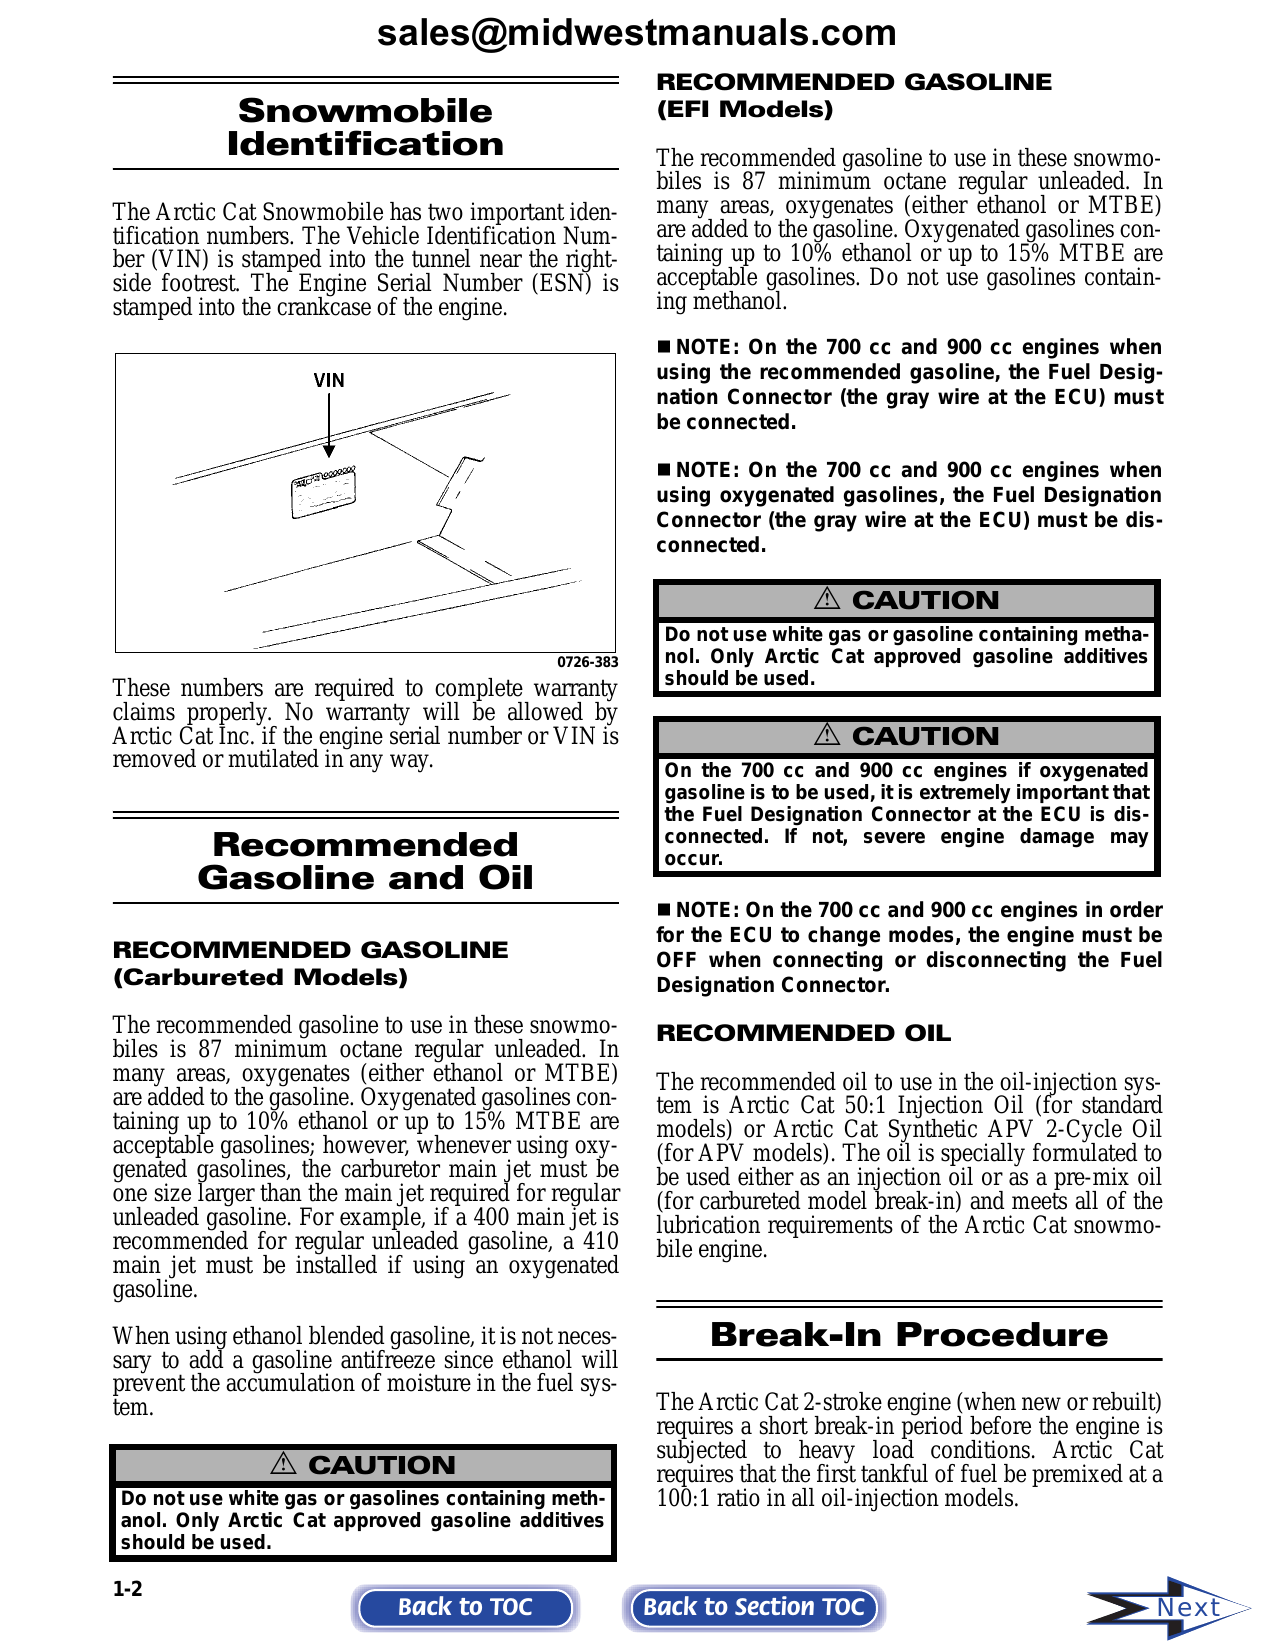 2006 Arctic Cat 2- and 4-stroke snowmobile service, shop manual Preview image 4